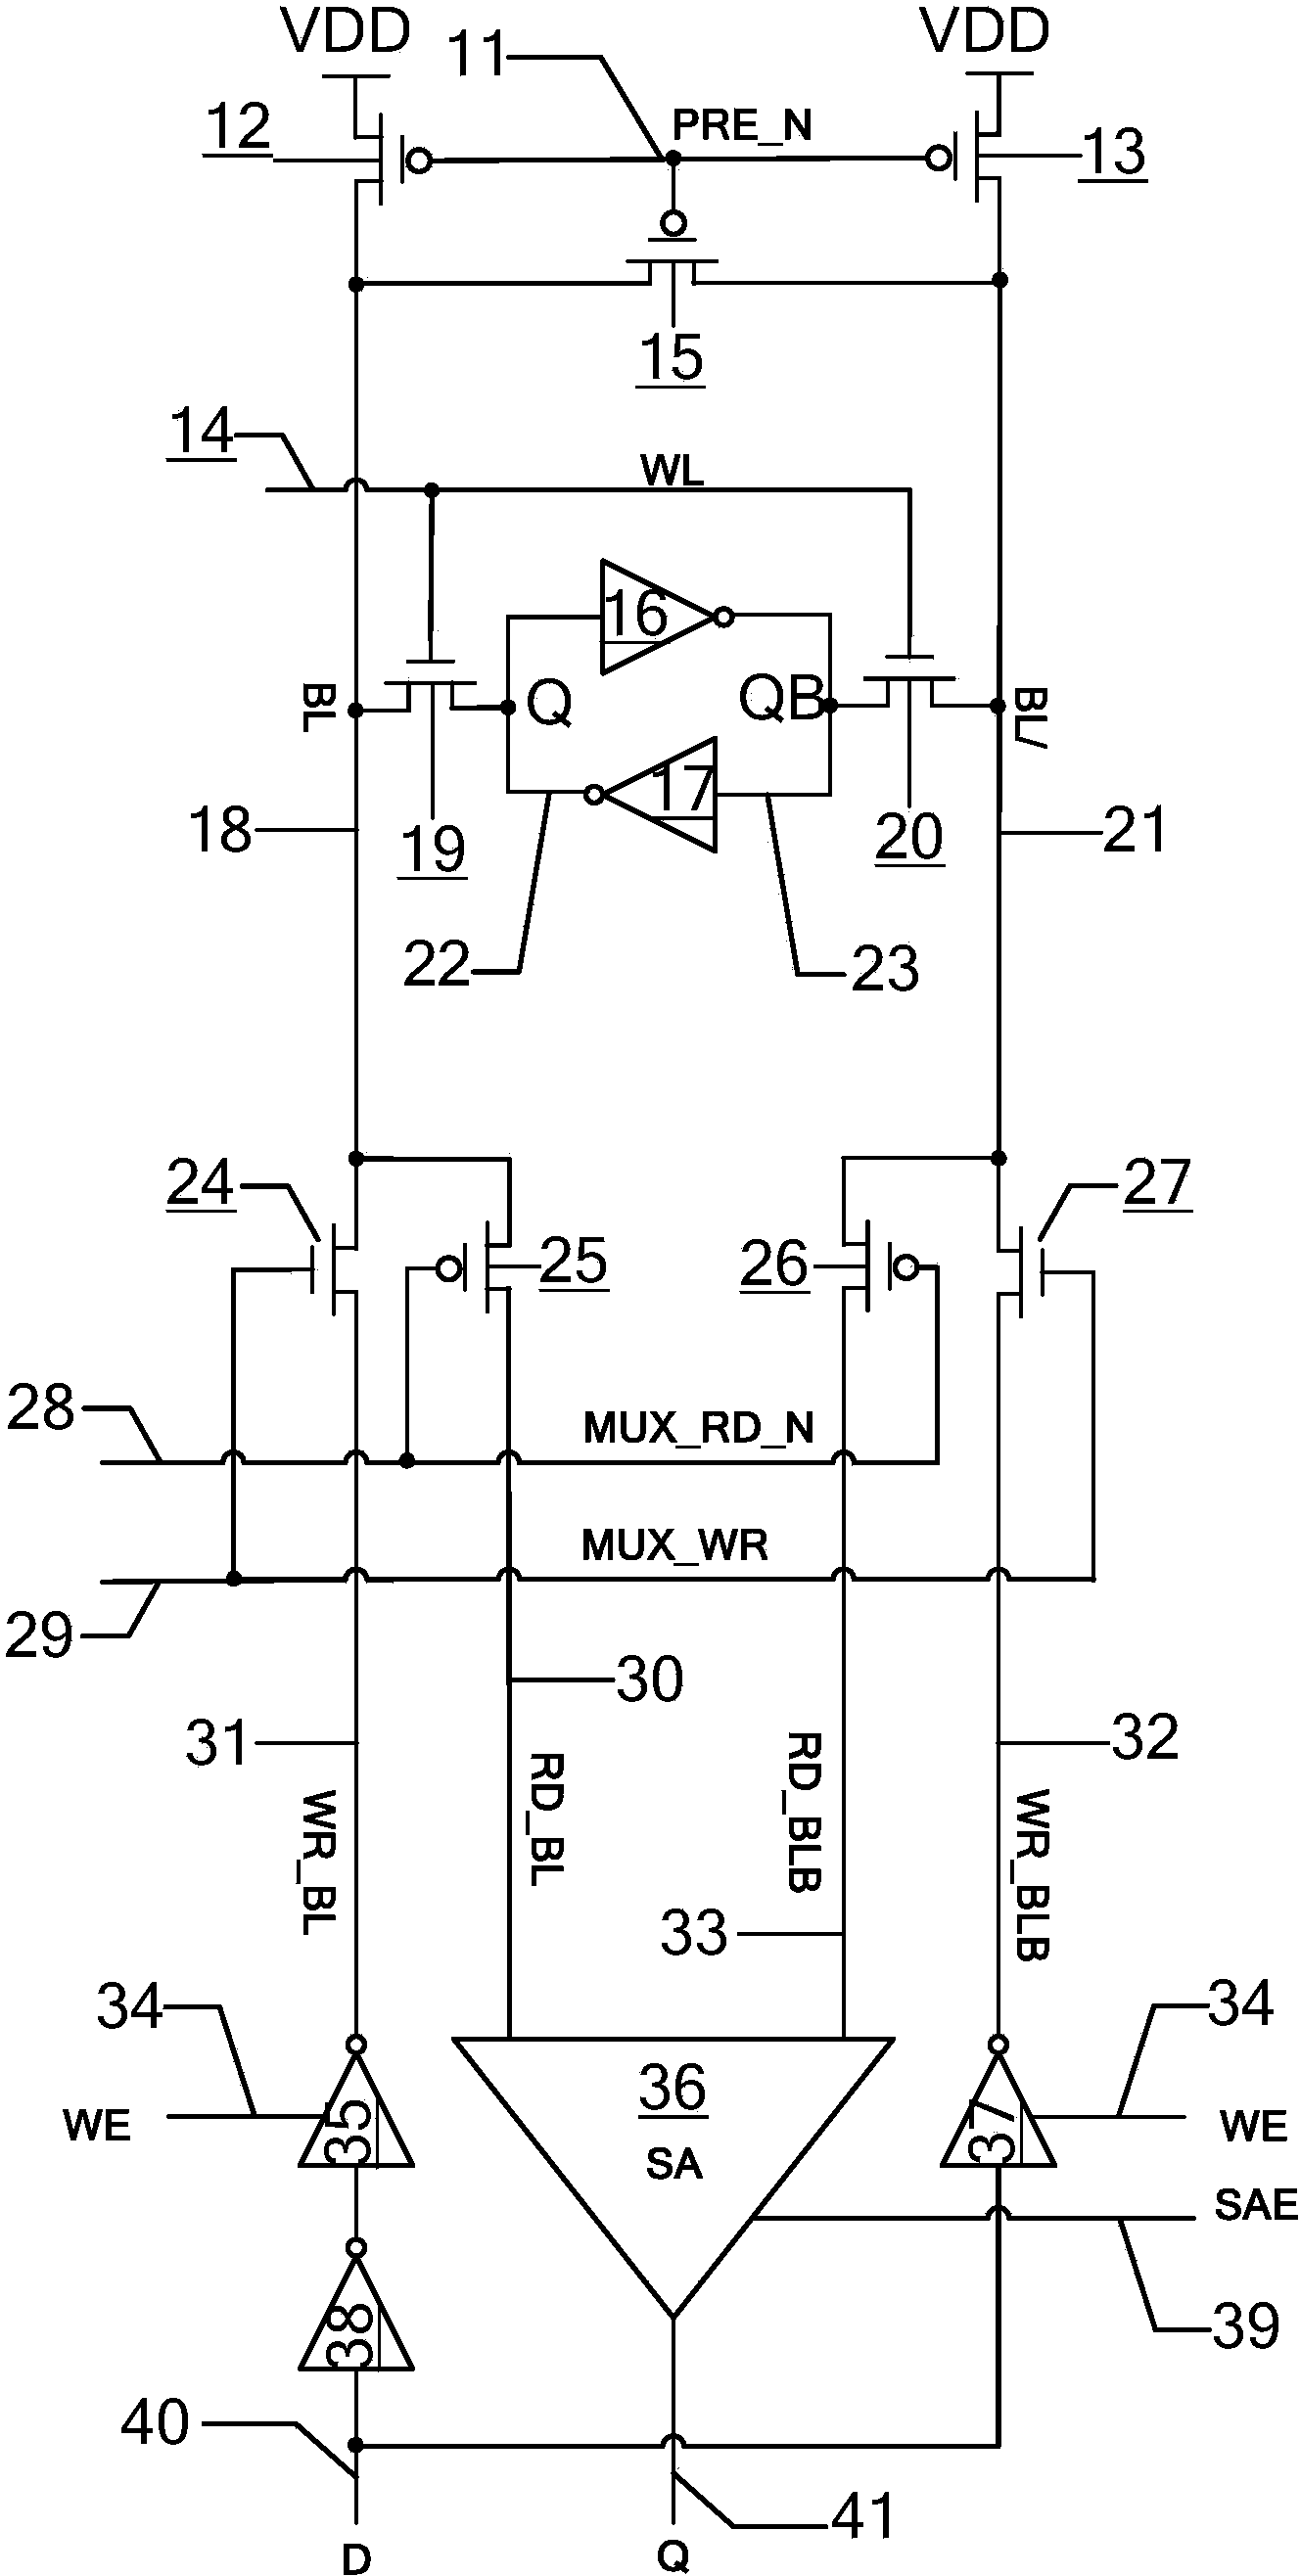 Copy-on-write circuit suitable for static random access memory